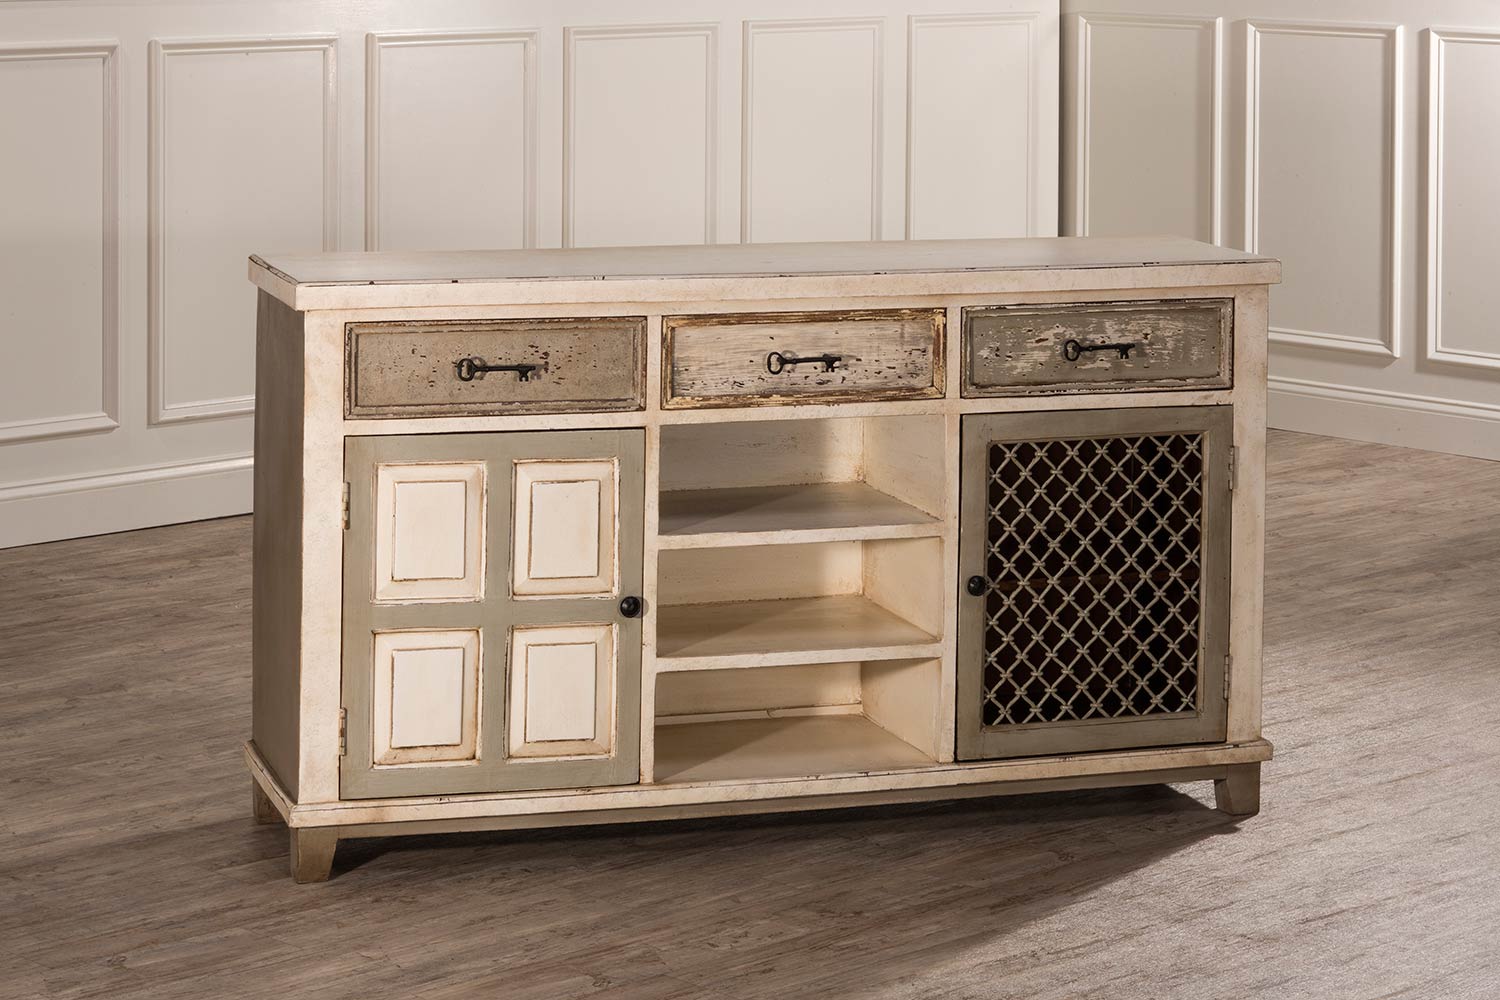 Hillsdale LaRose Console Table with 2 Door Storage and Wine Rack - Handpainted White/Gray